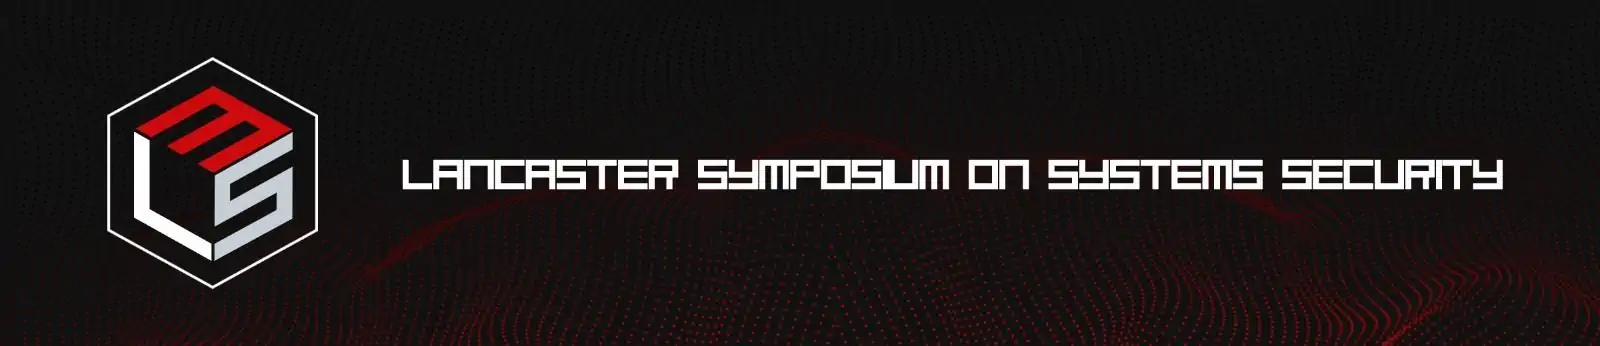 Lancaster Symposium on Systems Security